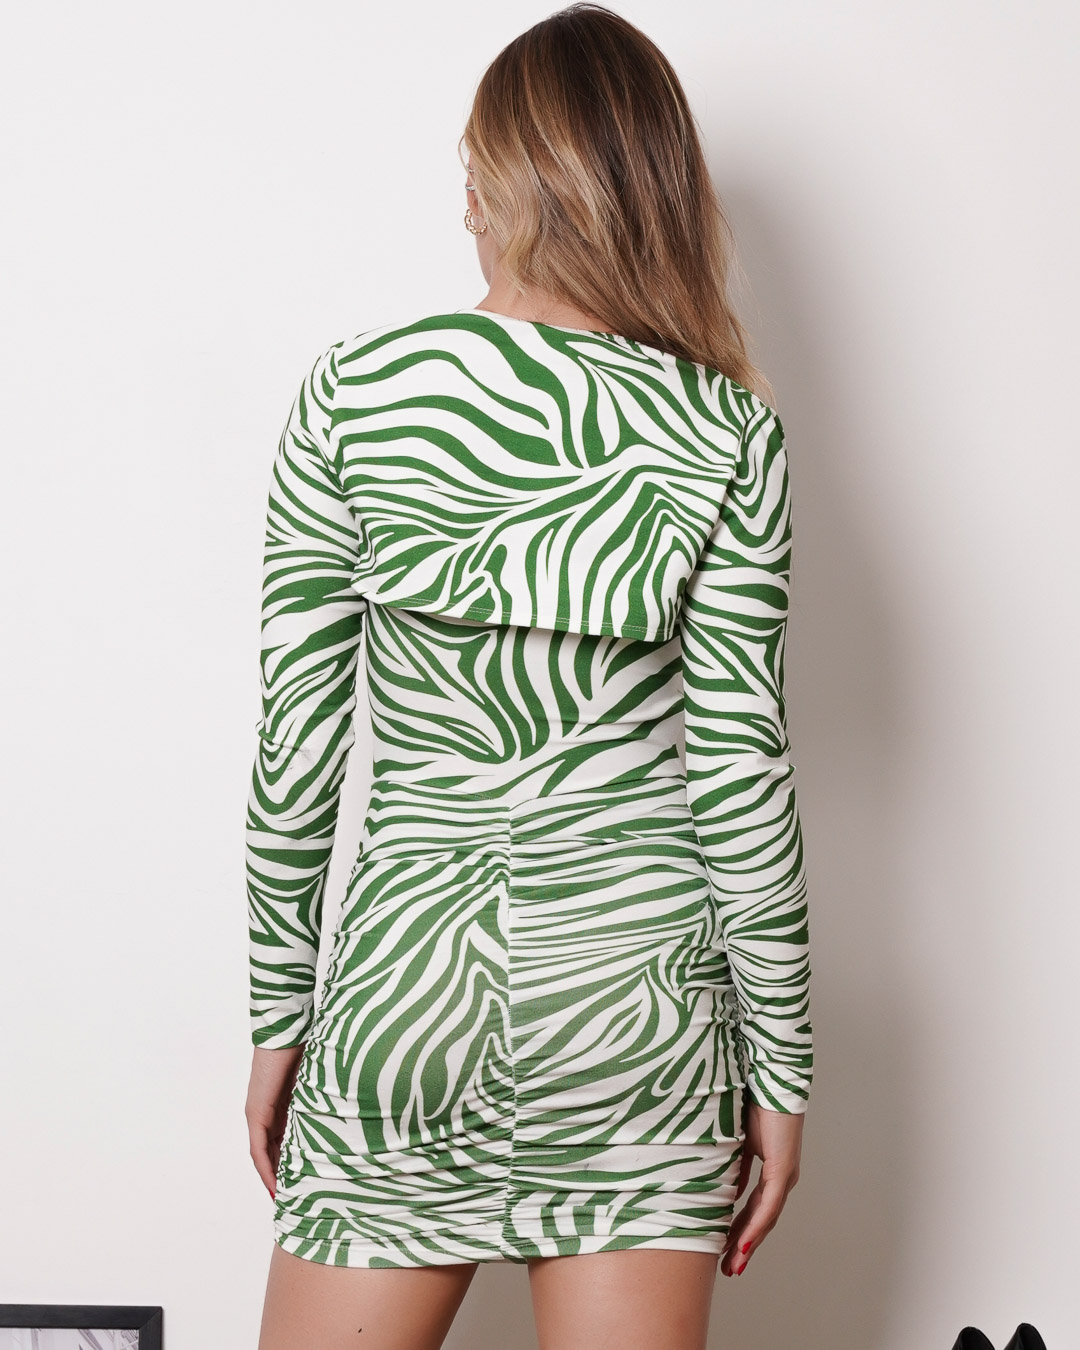 Miss Misses - Dress Miss Misses Printed Tube With Green Blouse - 18904023